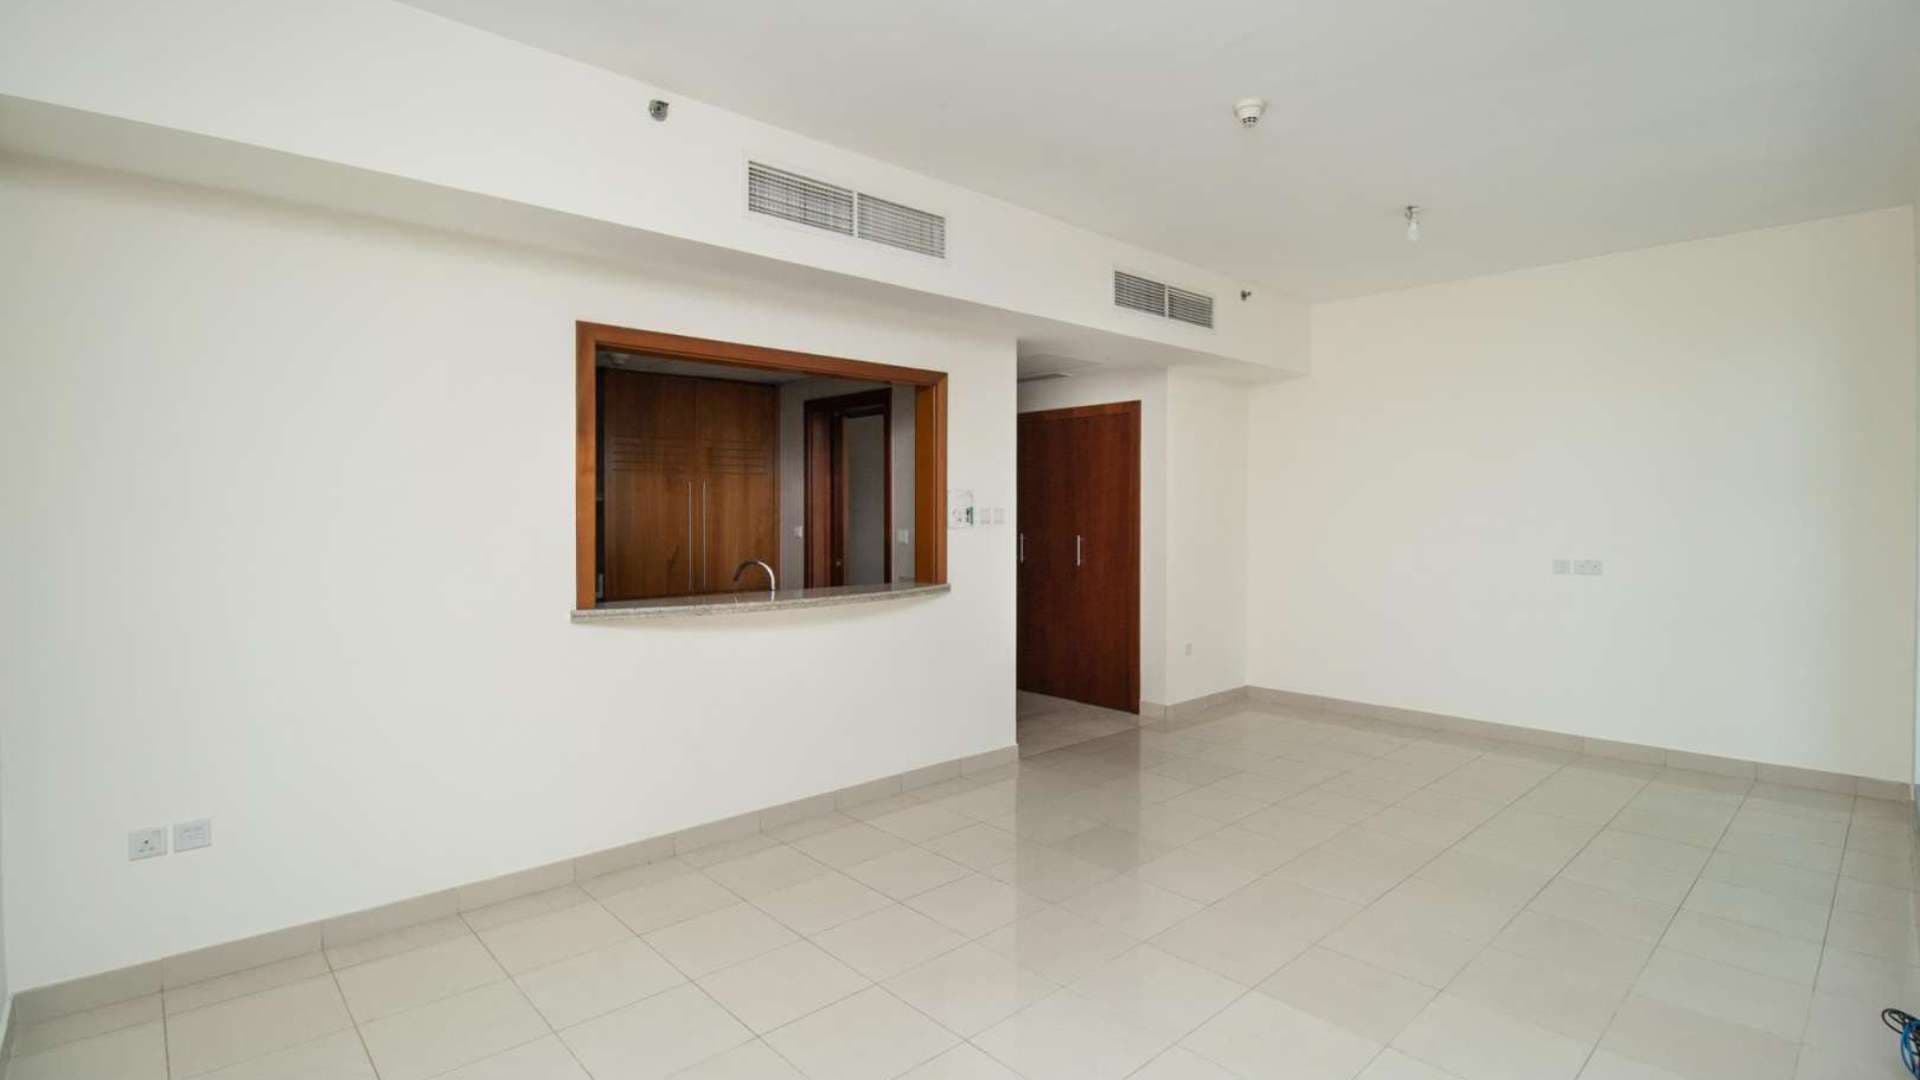 1 Bedroom Apartment For Rent Standpoint Tower A Lp10239 1dd339caa6320600.jpg